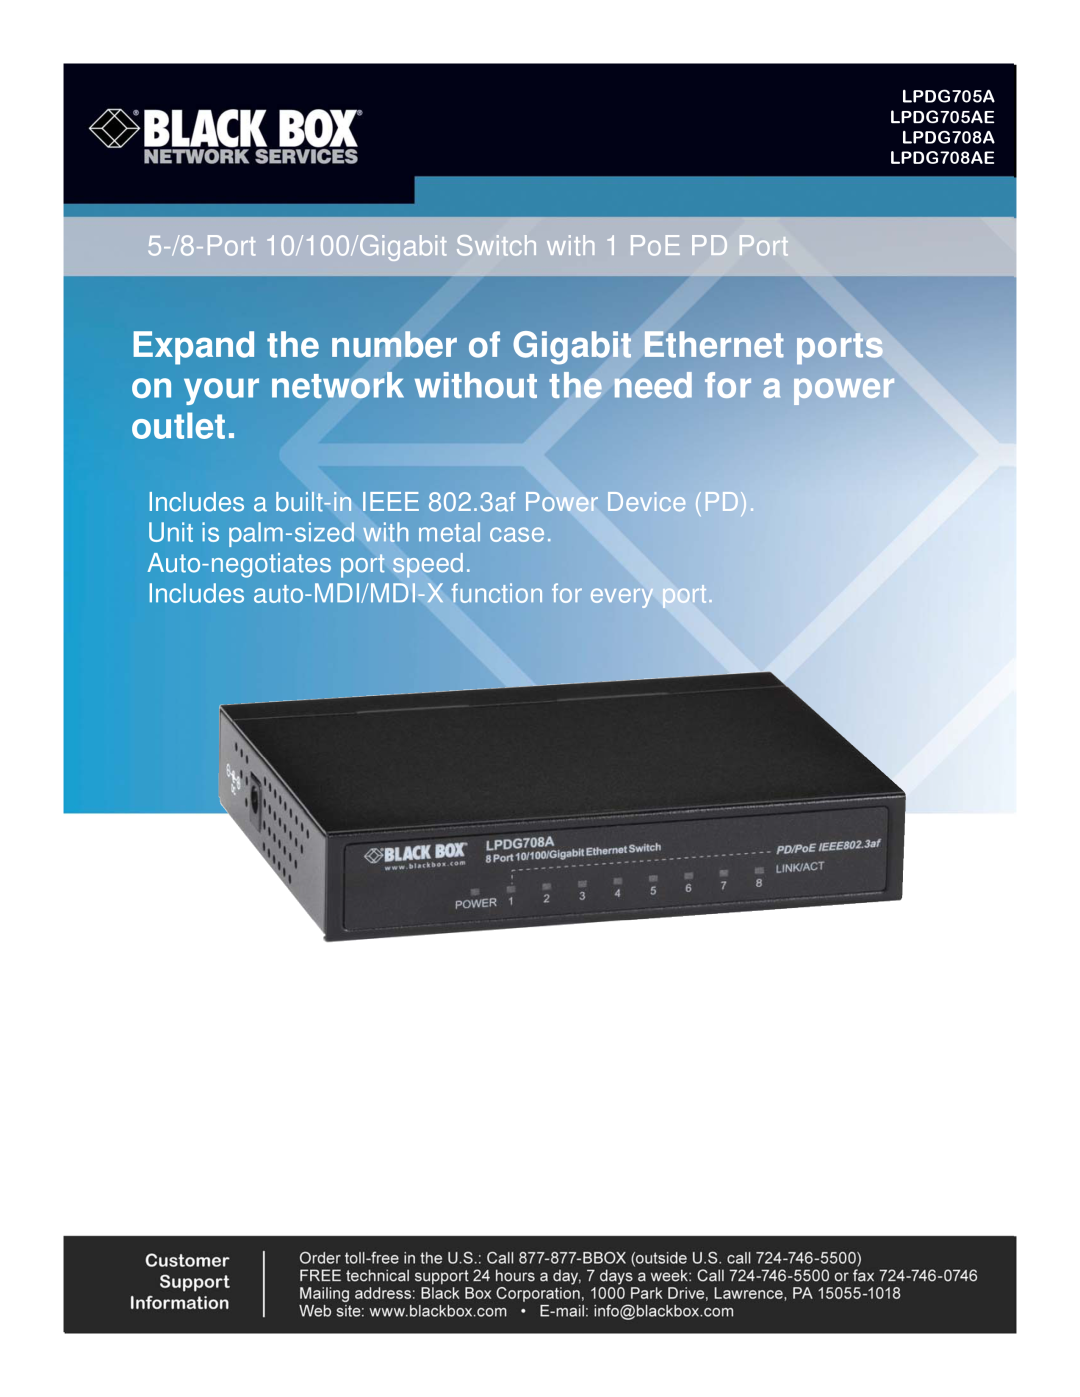 Black Box LPDG705AE manual 5-/8-Port10/100/Gigabit Switch with 1 PoE PD Port, Unit is palm-sizedwith metal case 